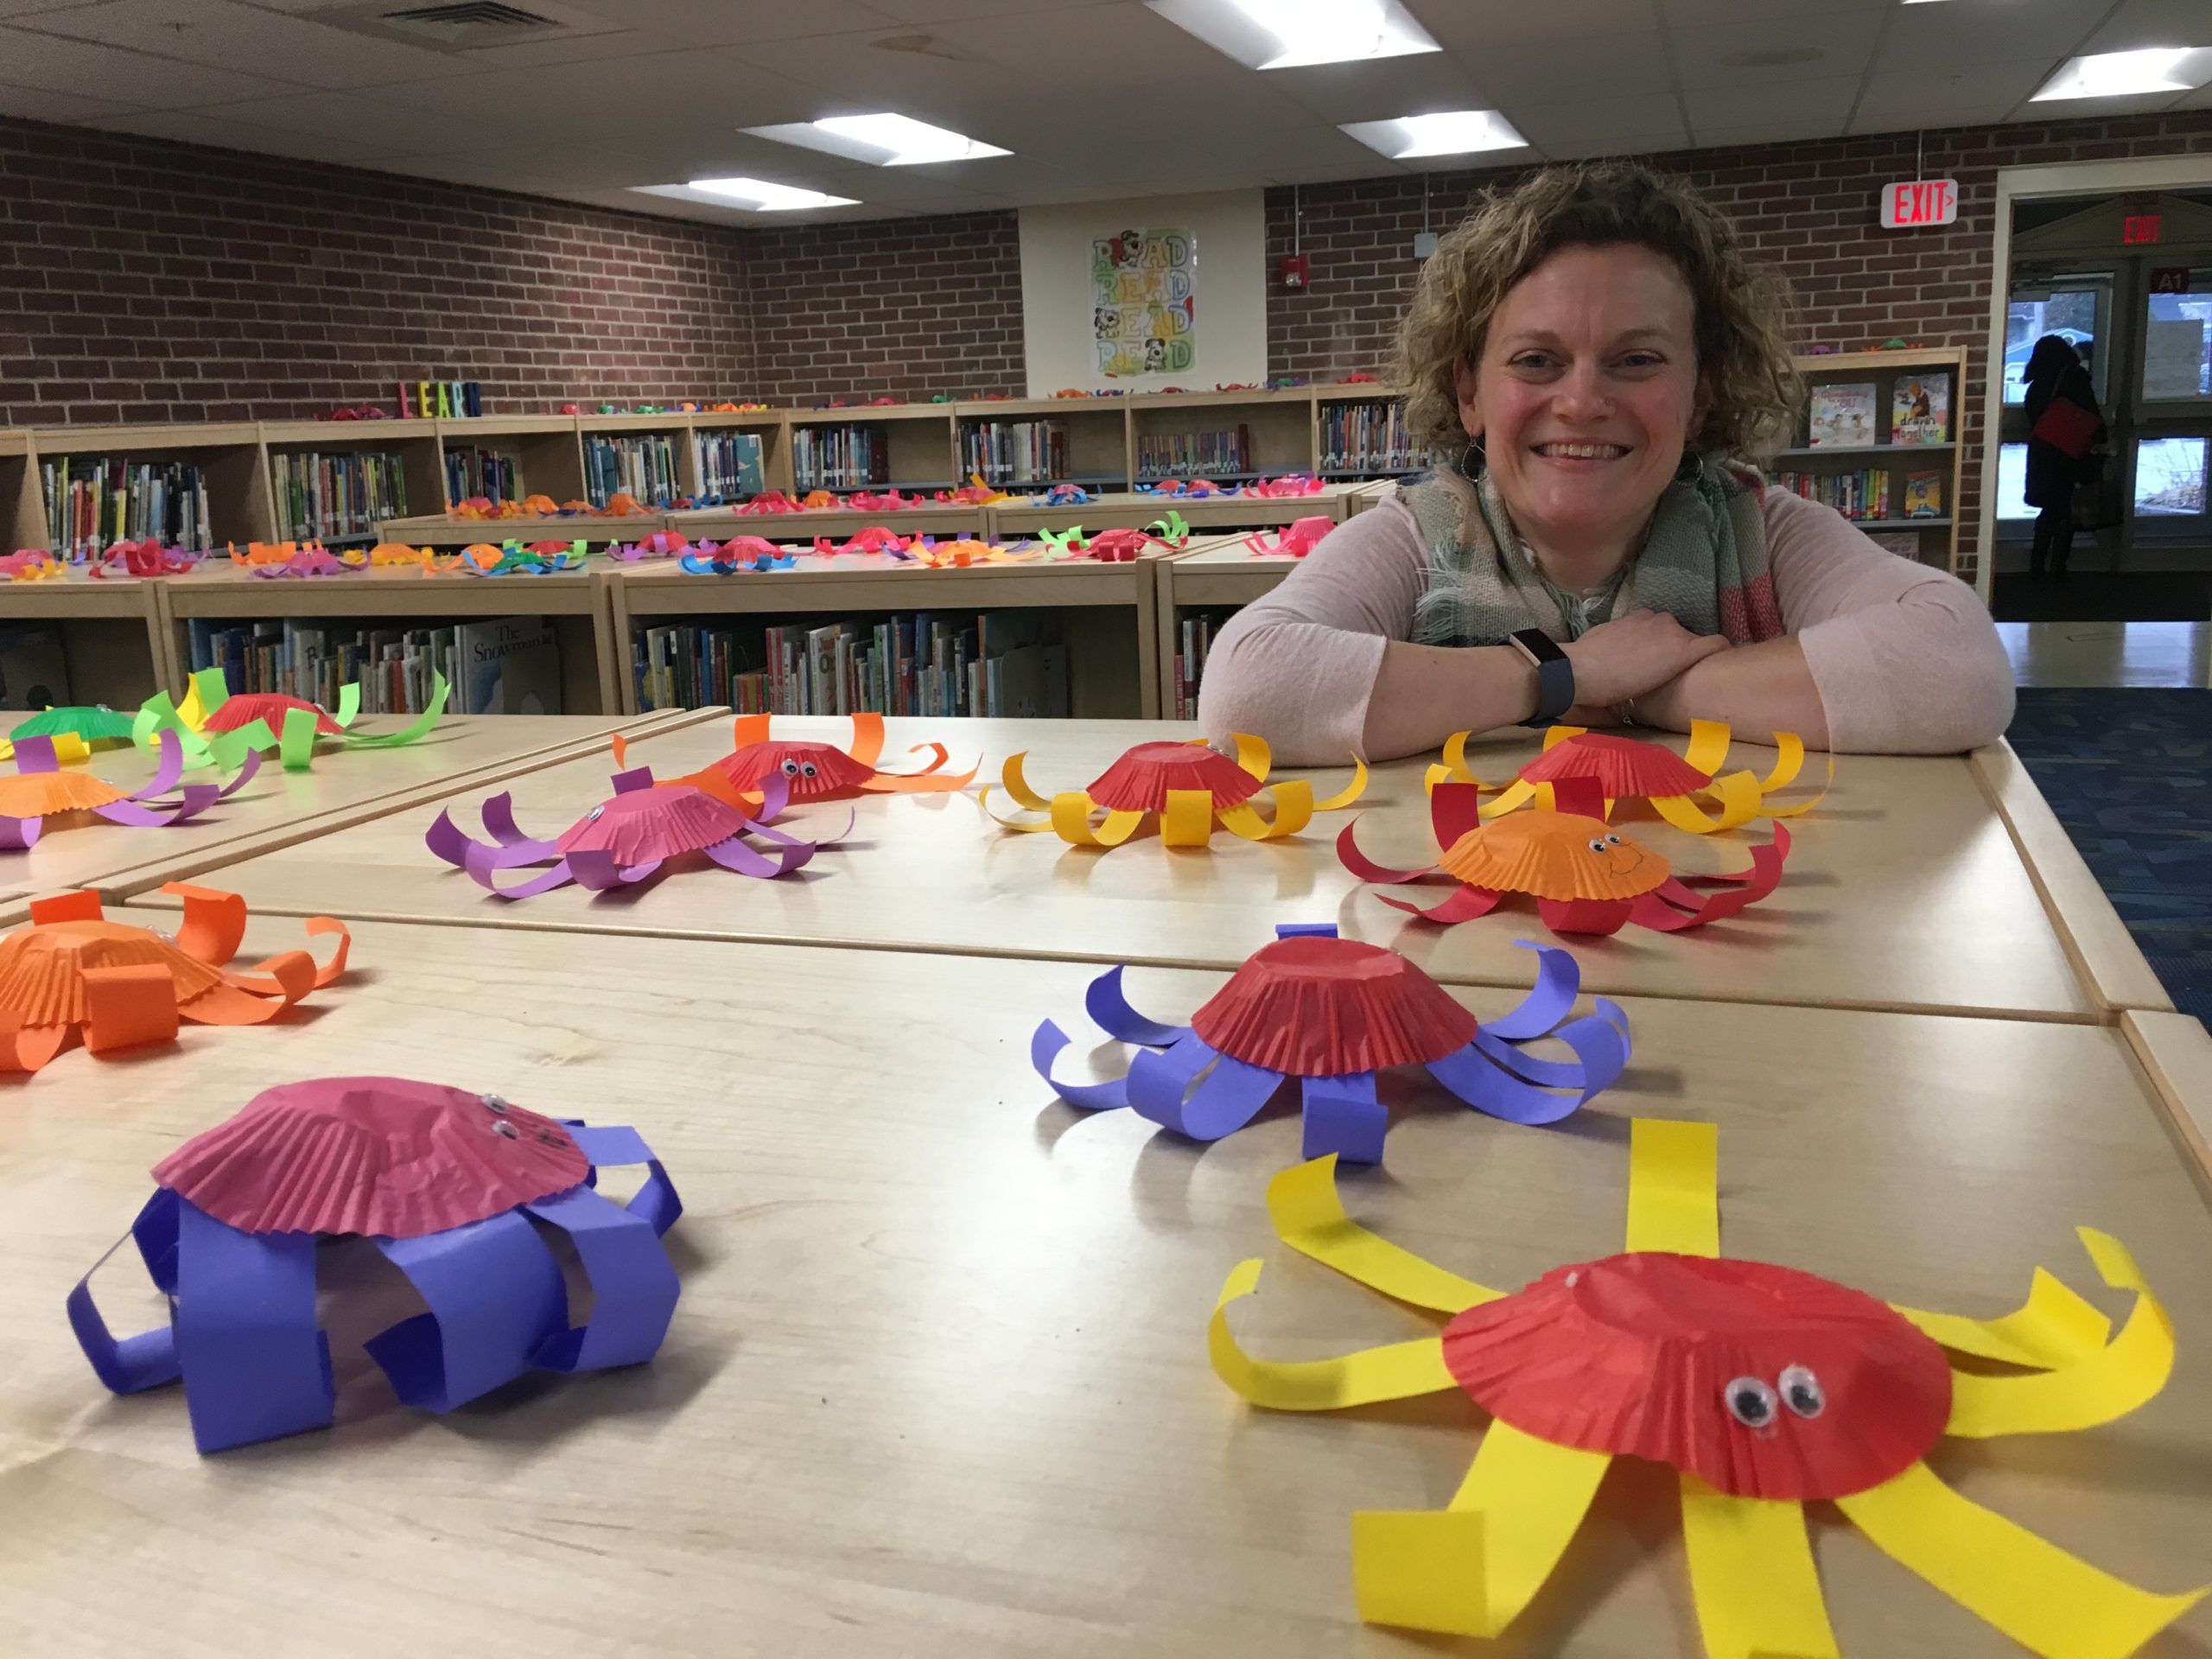 Sy was greeted by a library full of little octopuses at the Franklin Elementary School in Keene, New Hampshire